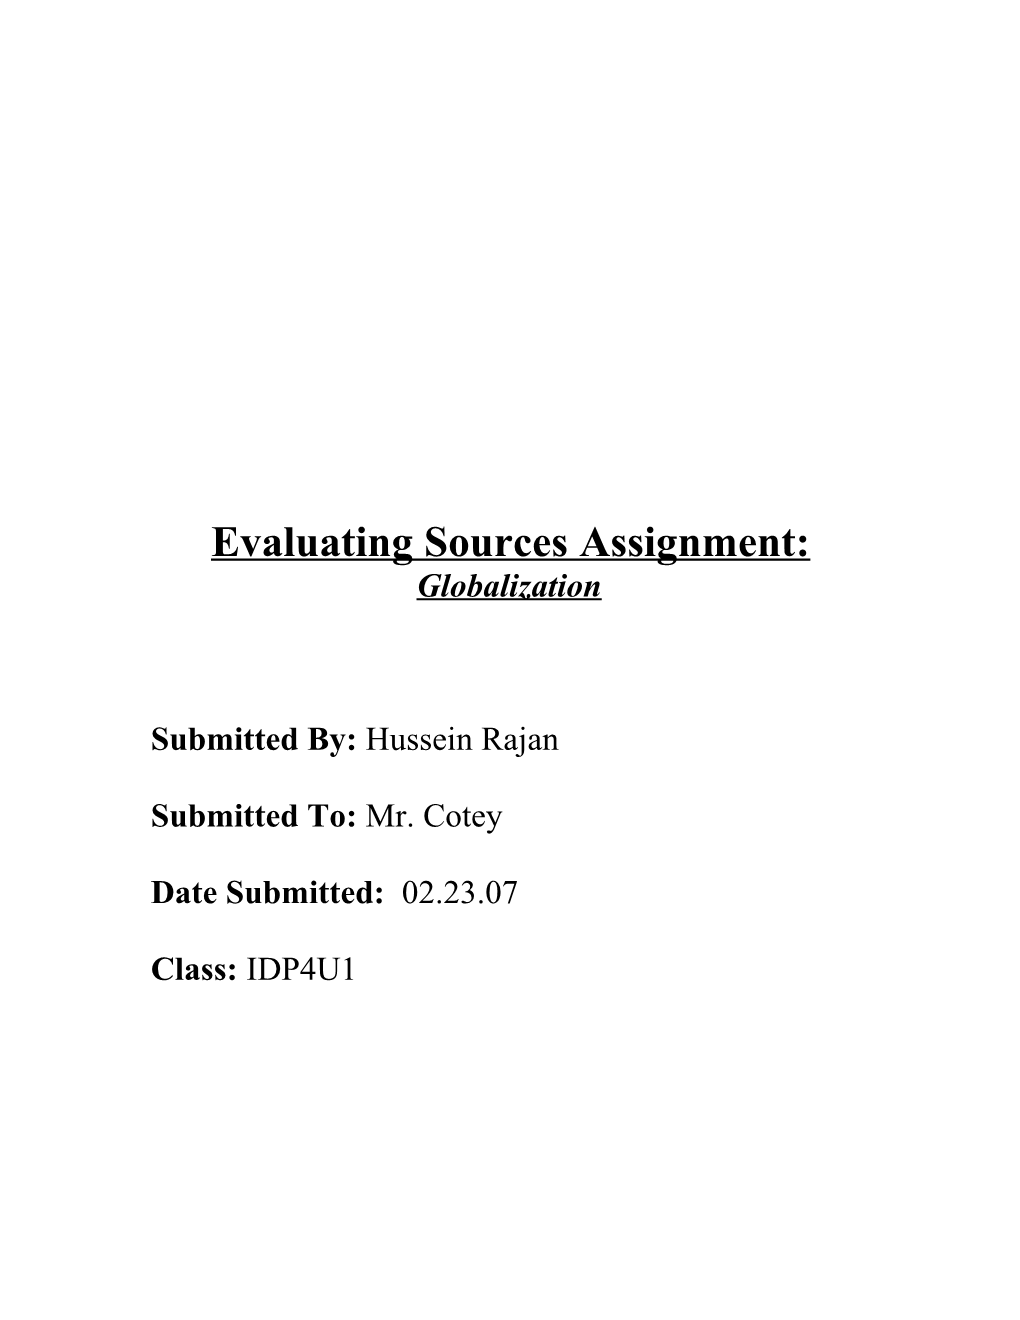 Evaluating Sources Assignment